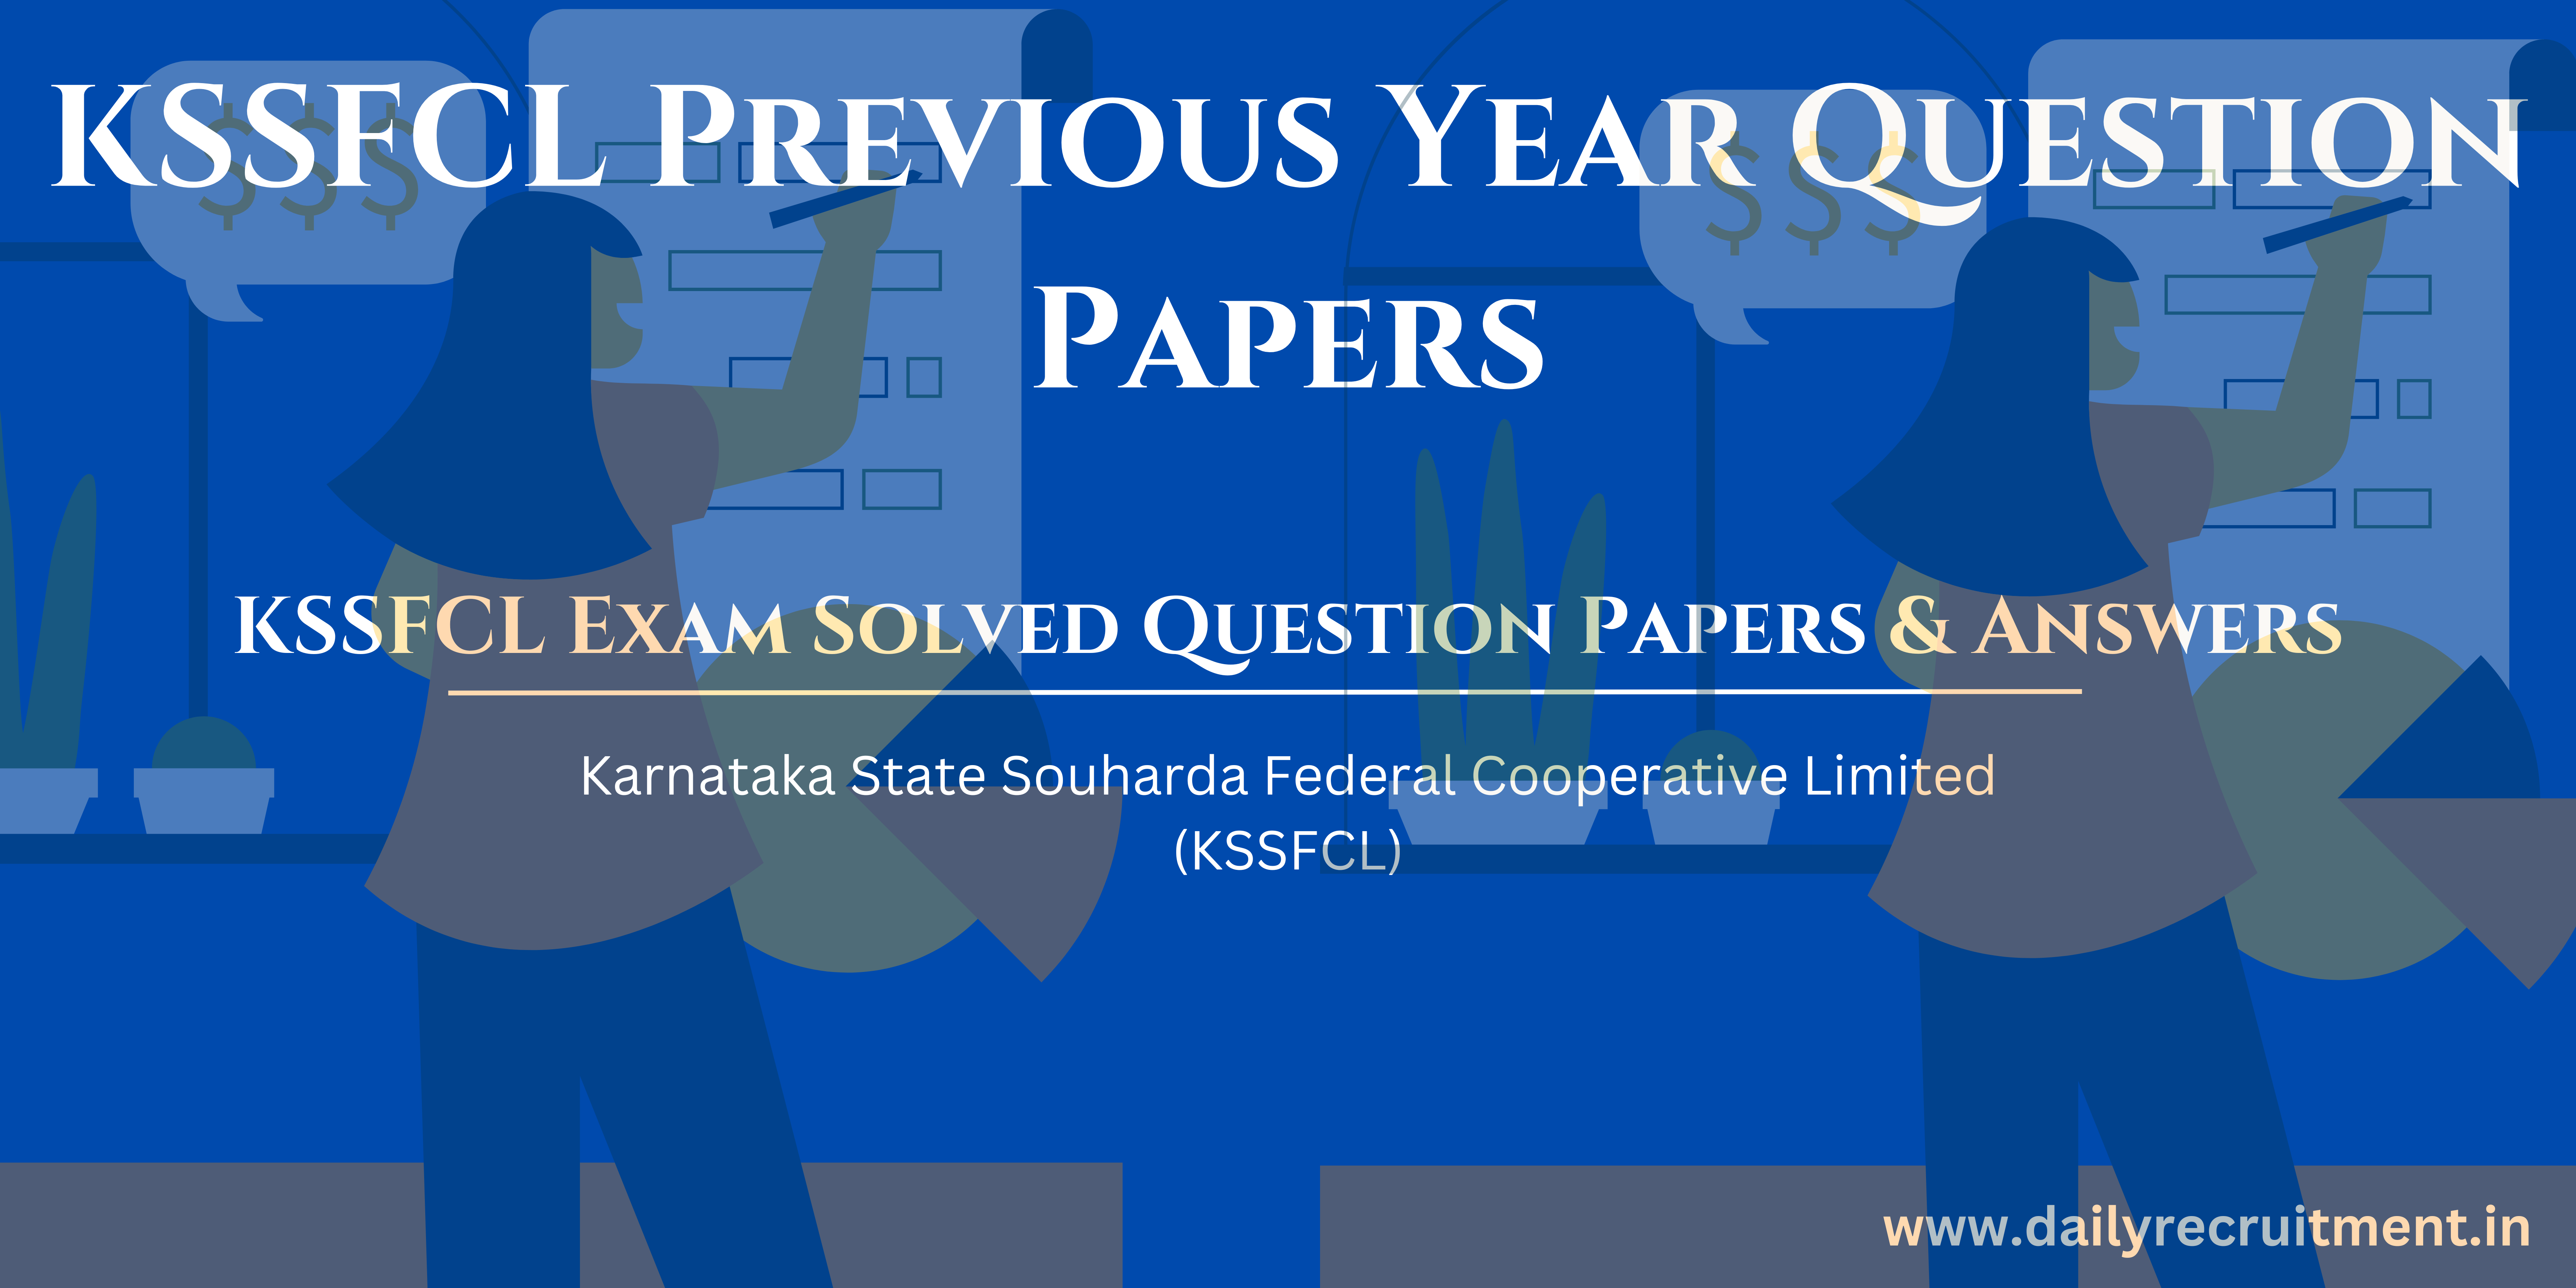 KSSFCL Previous Year Questions Papers